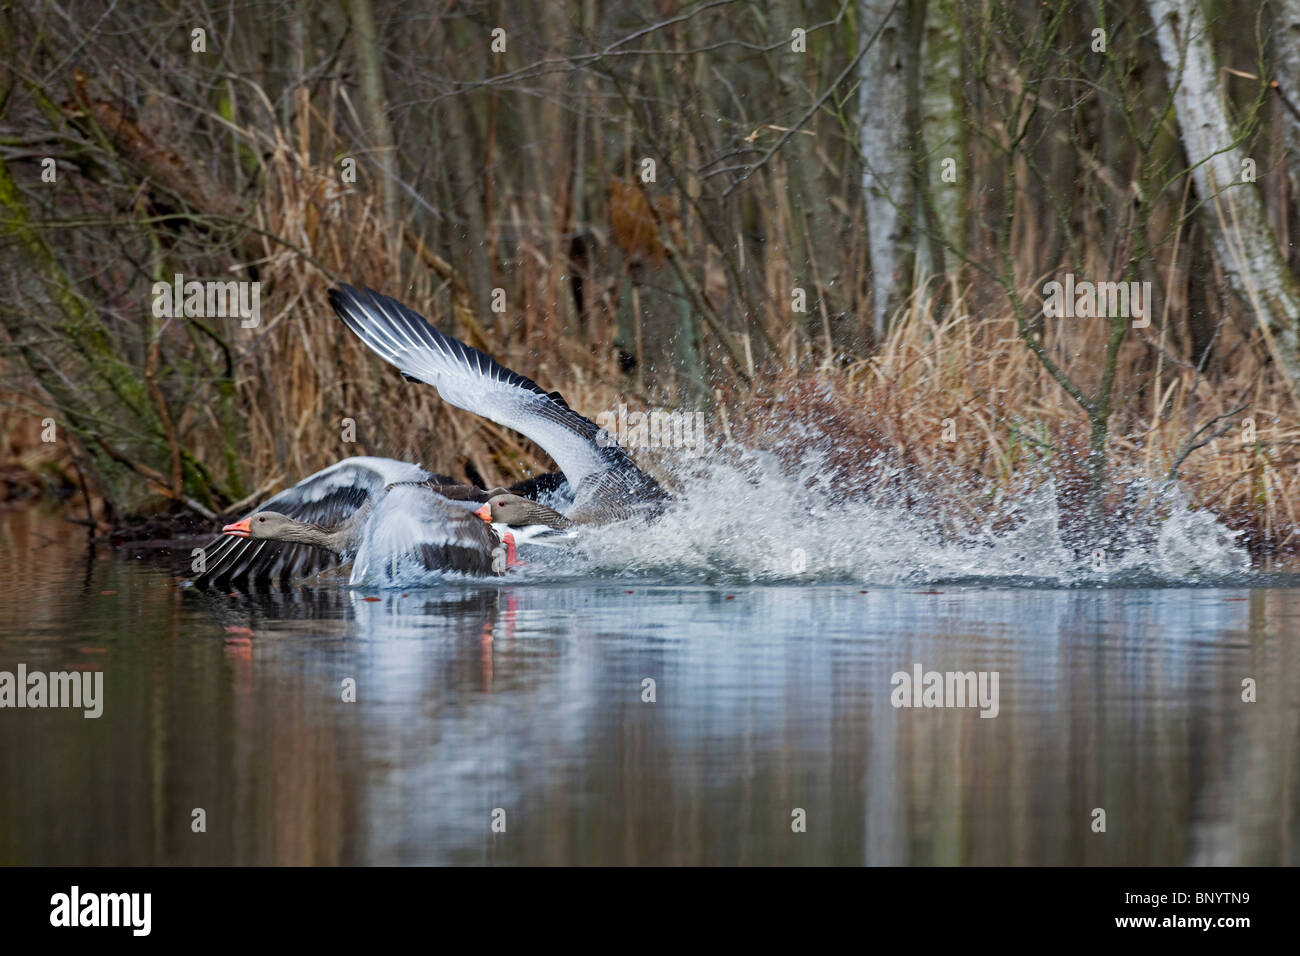 Greylag Goose / Graylag Geese (Anser anser) chasing and fighting, Germany Stock Photo